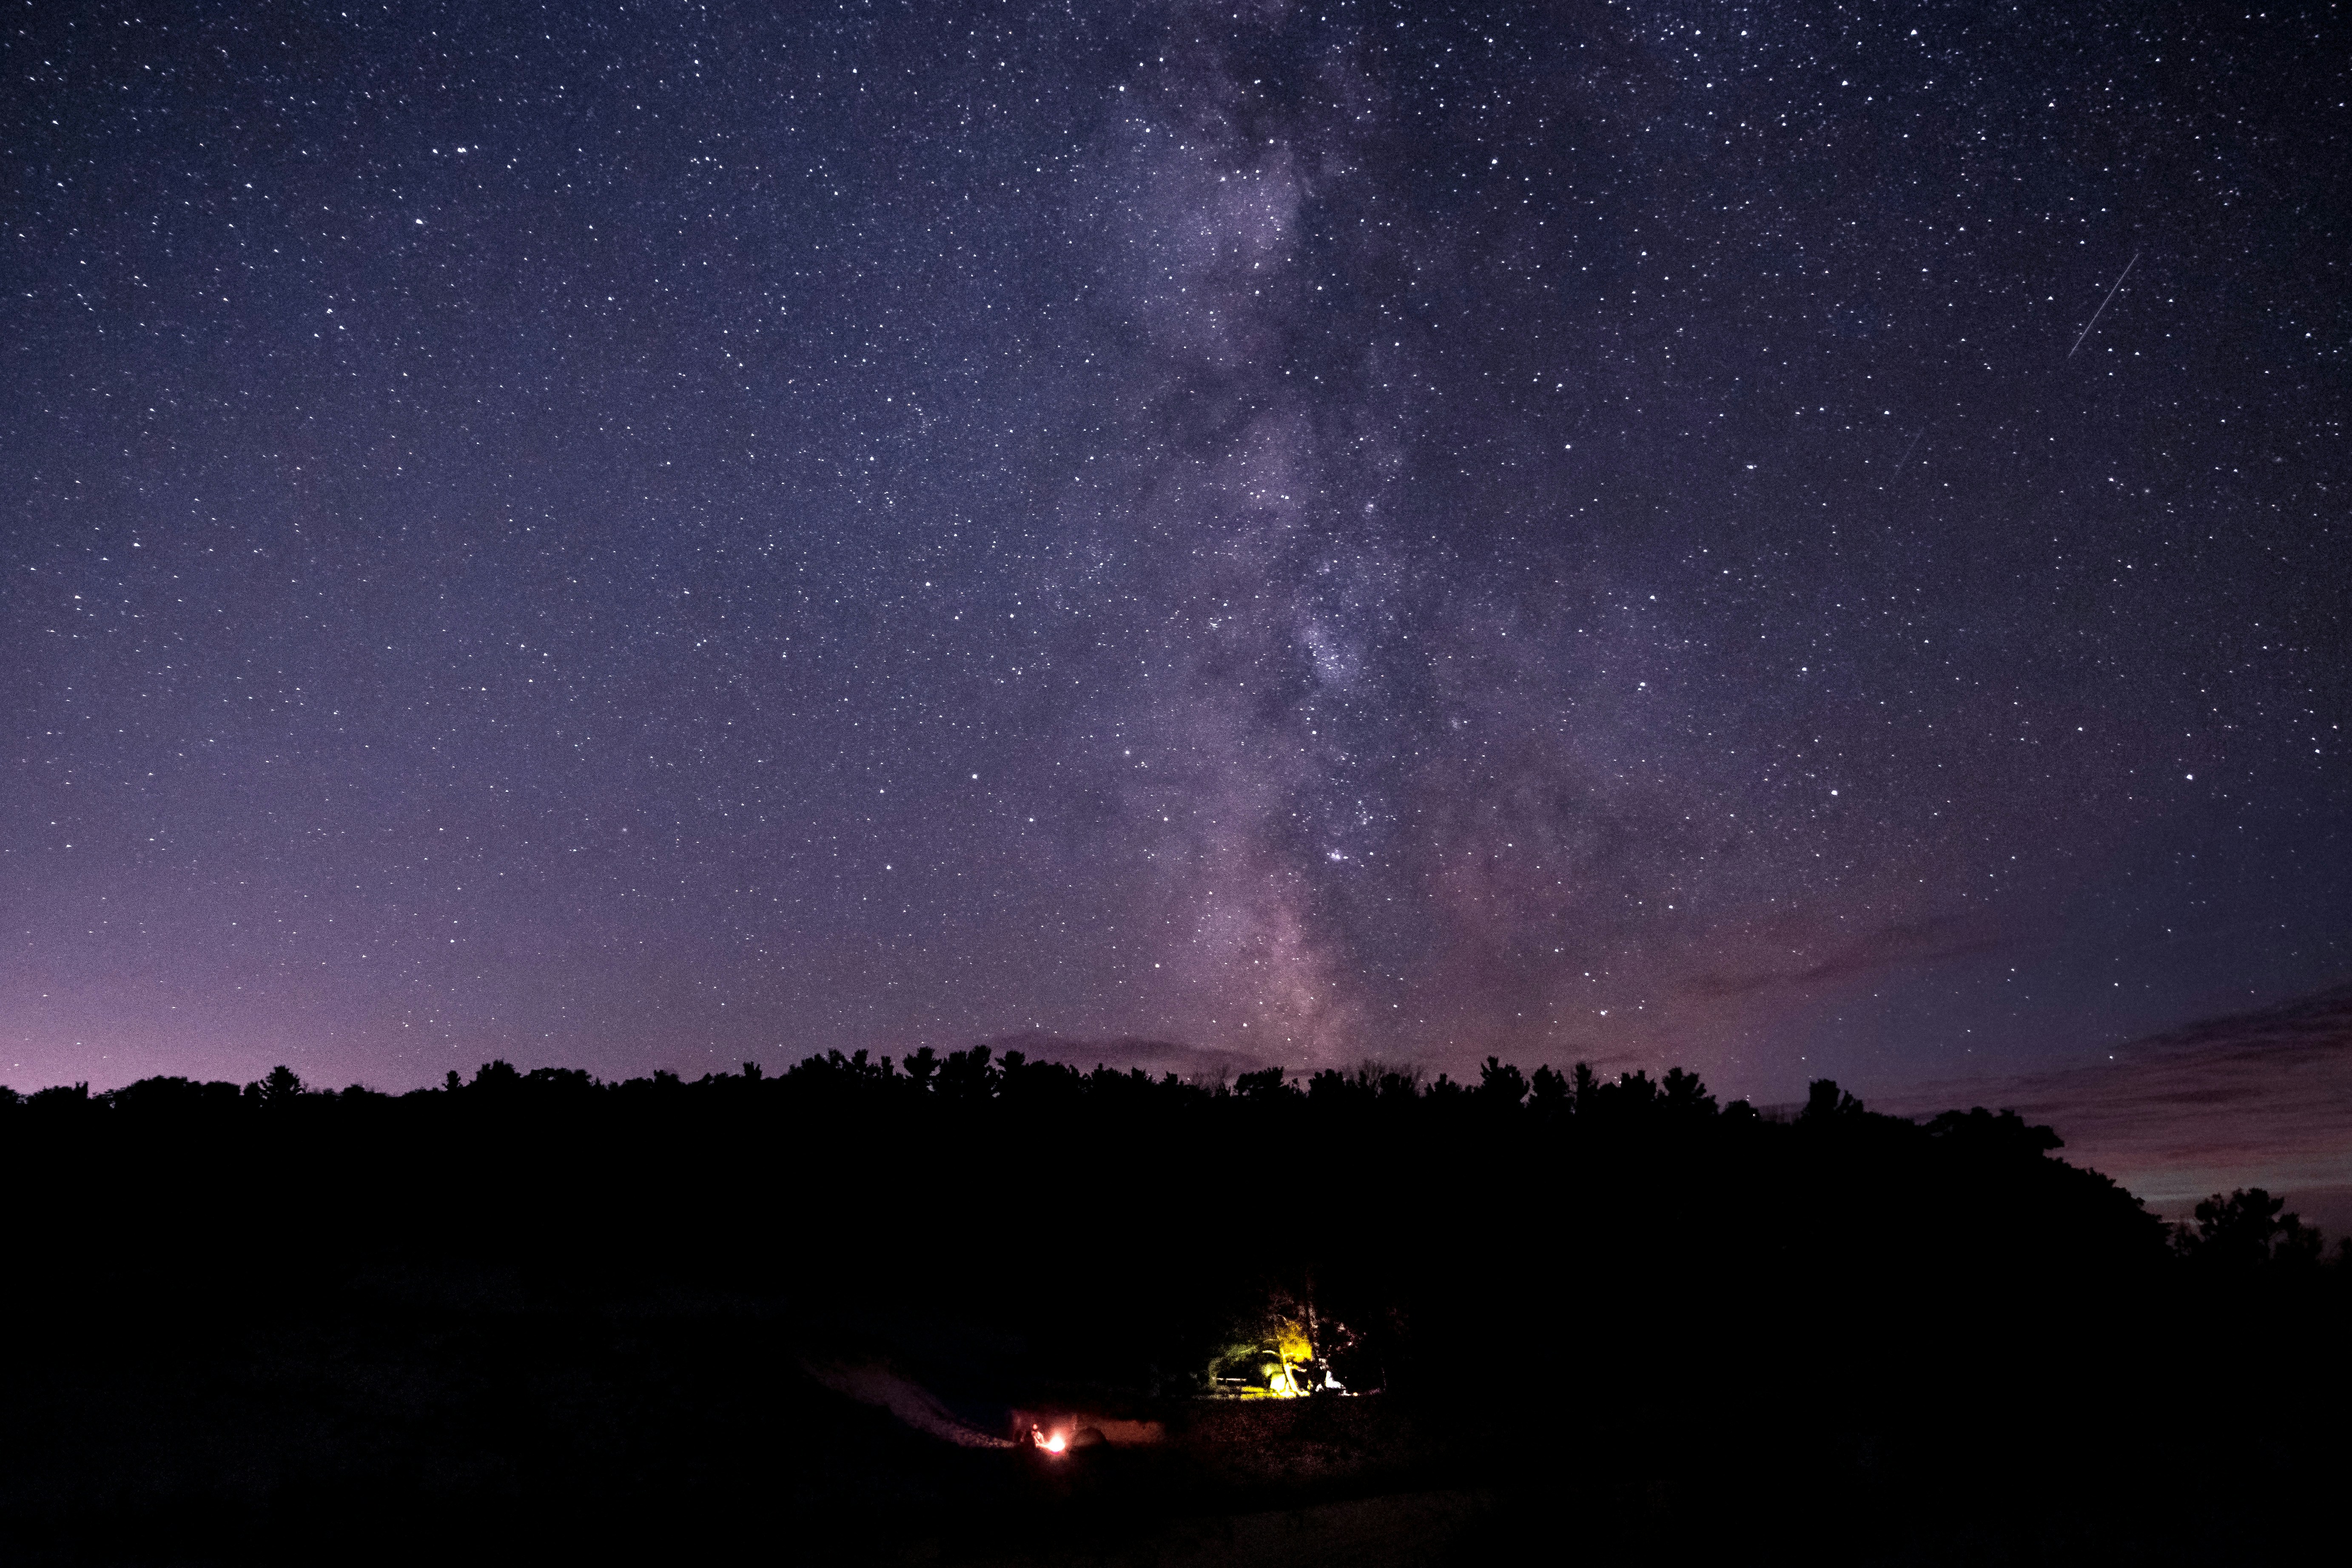 Camping under a Starry Sky